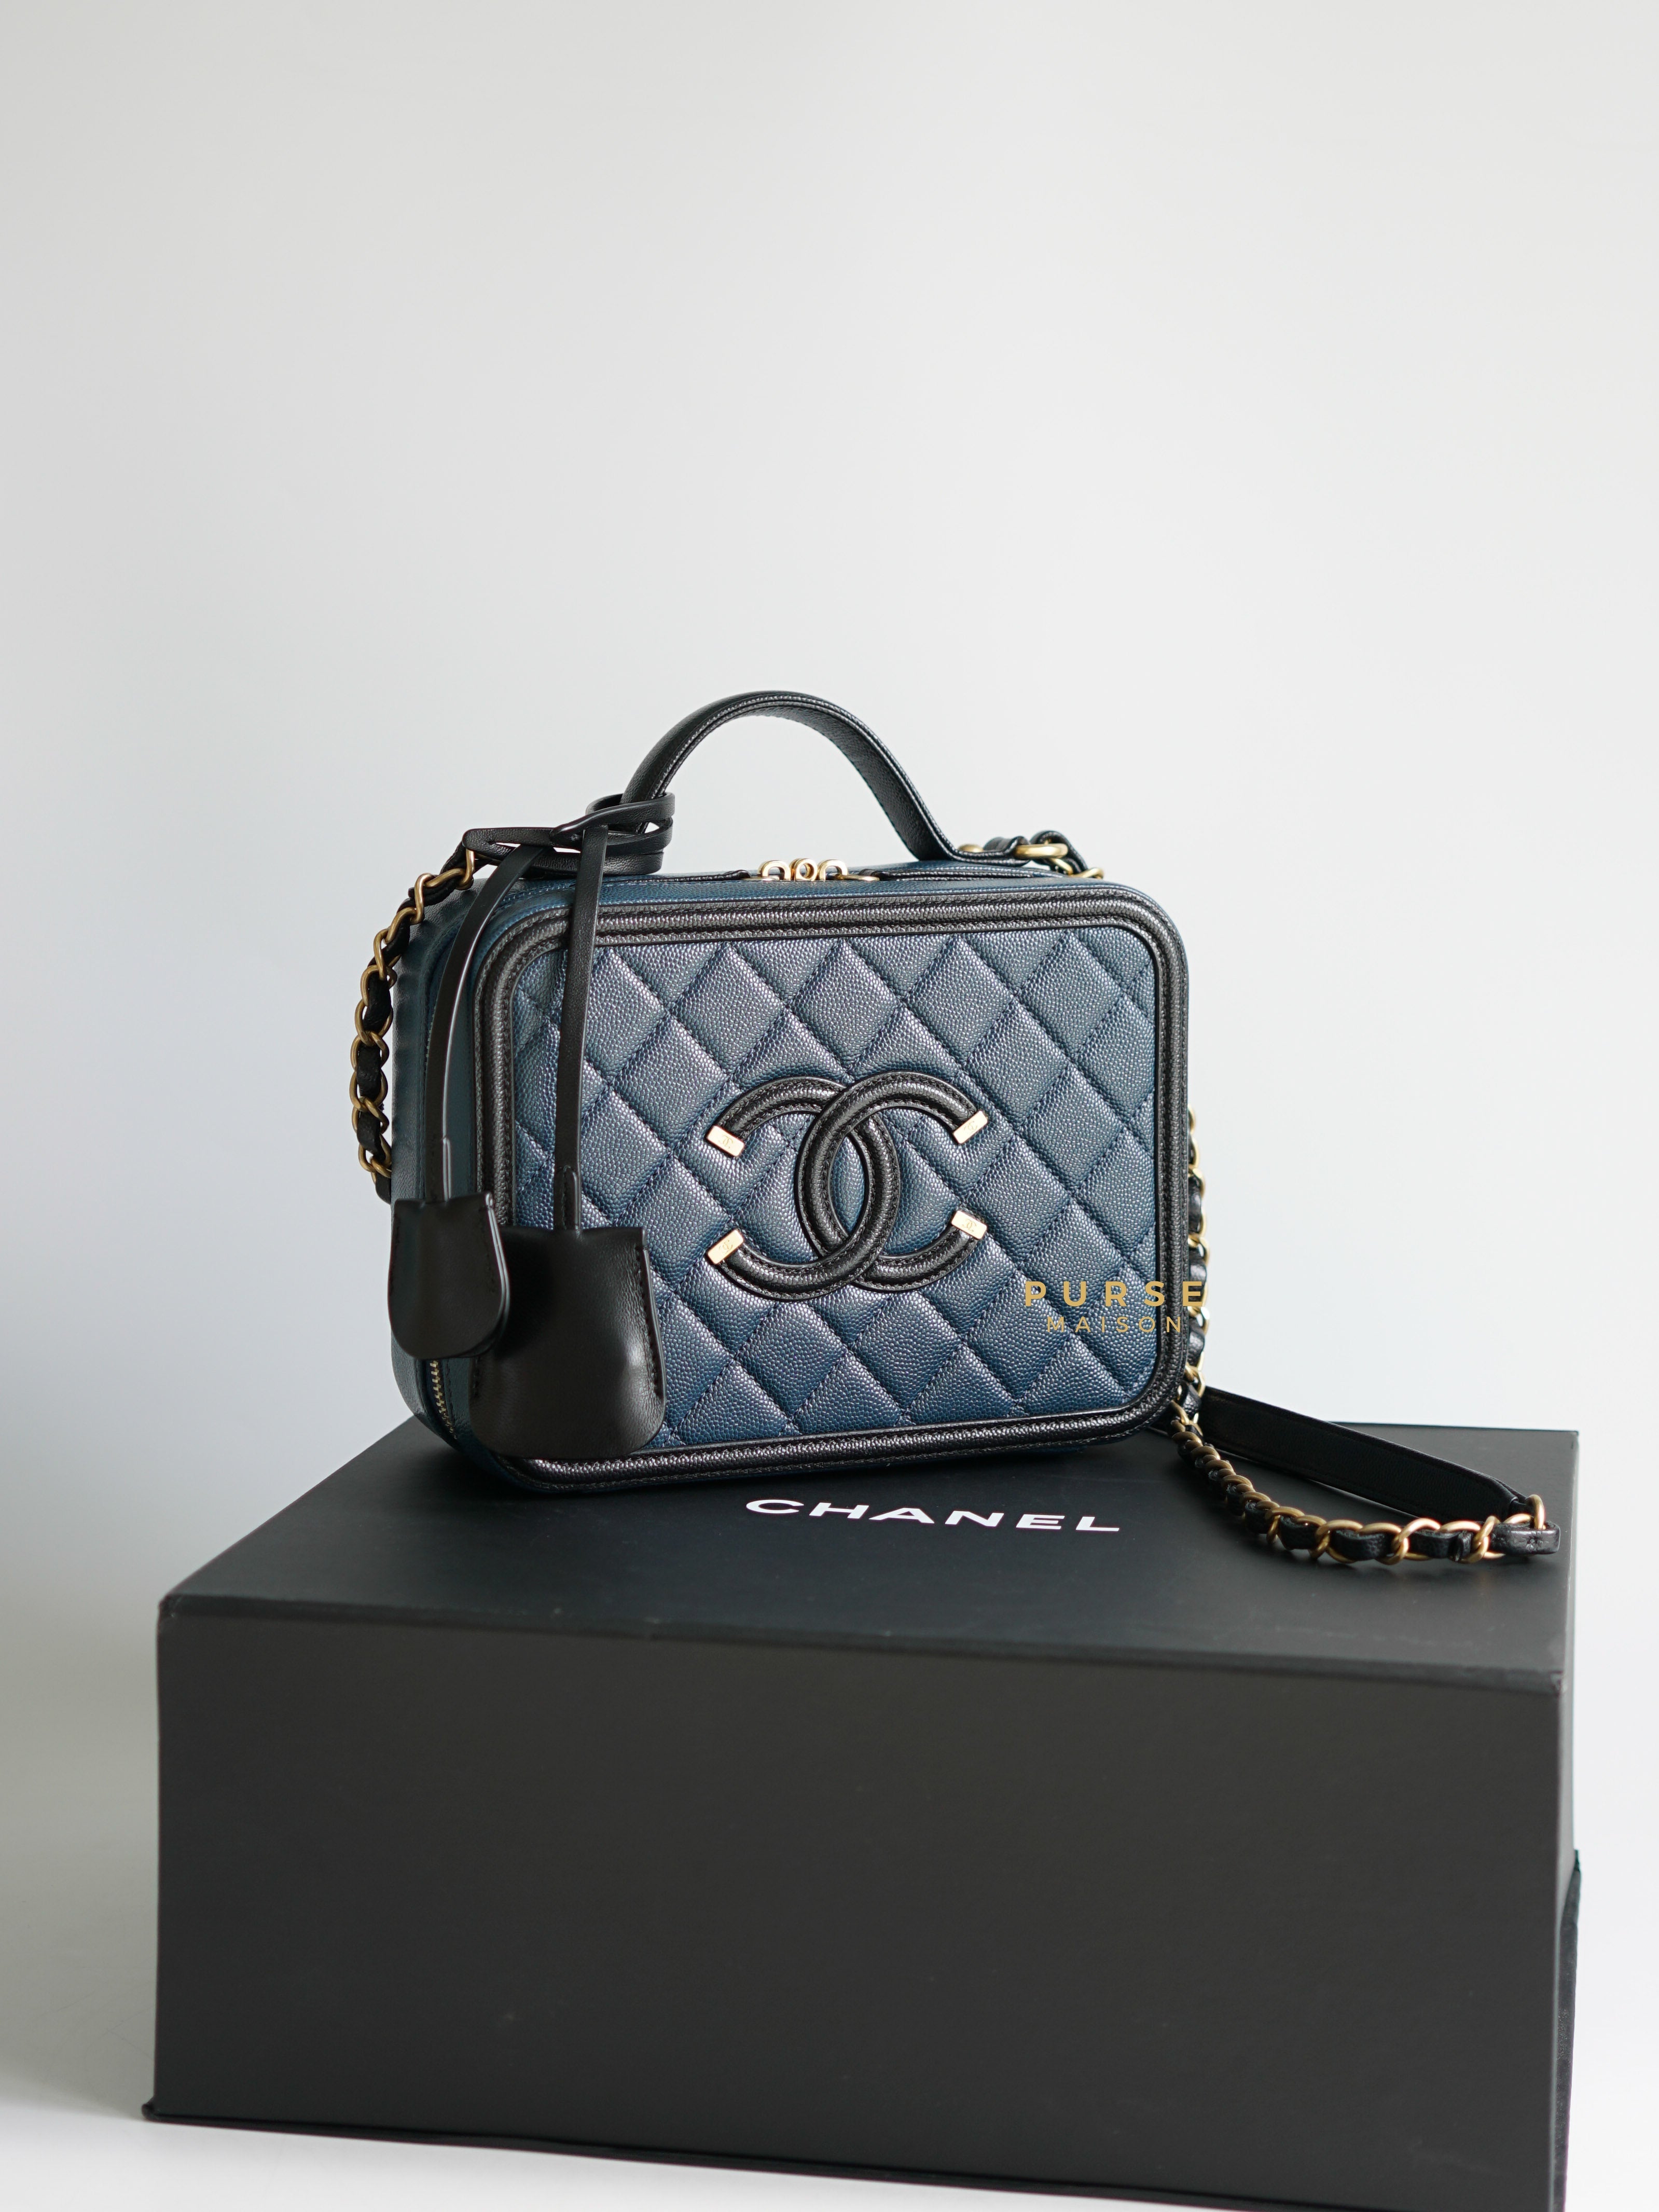 Chanel CC Filigree Medium Vanity Bag in Blue/Black Caviar Leather and Aged Gold Hardware Series 28 | Purse Maison Luxury Bags Shop